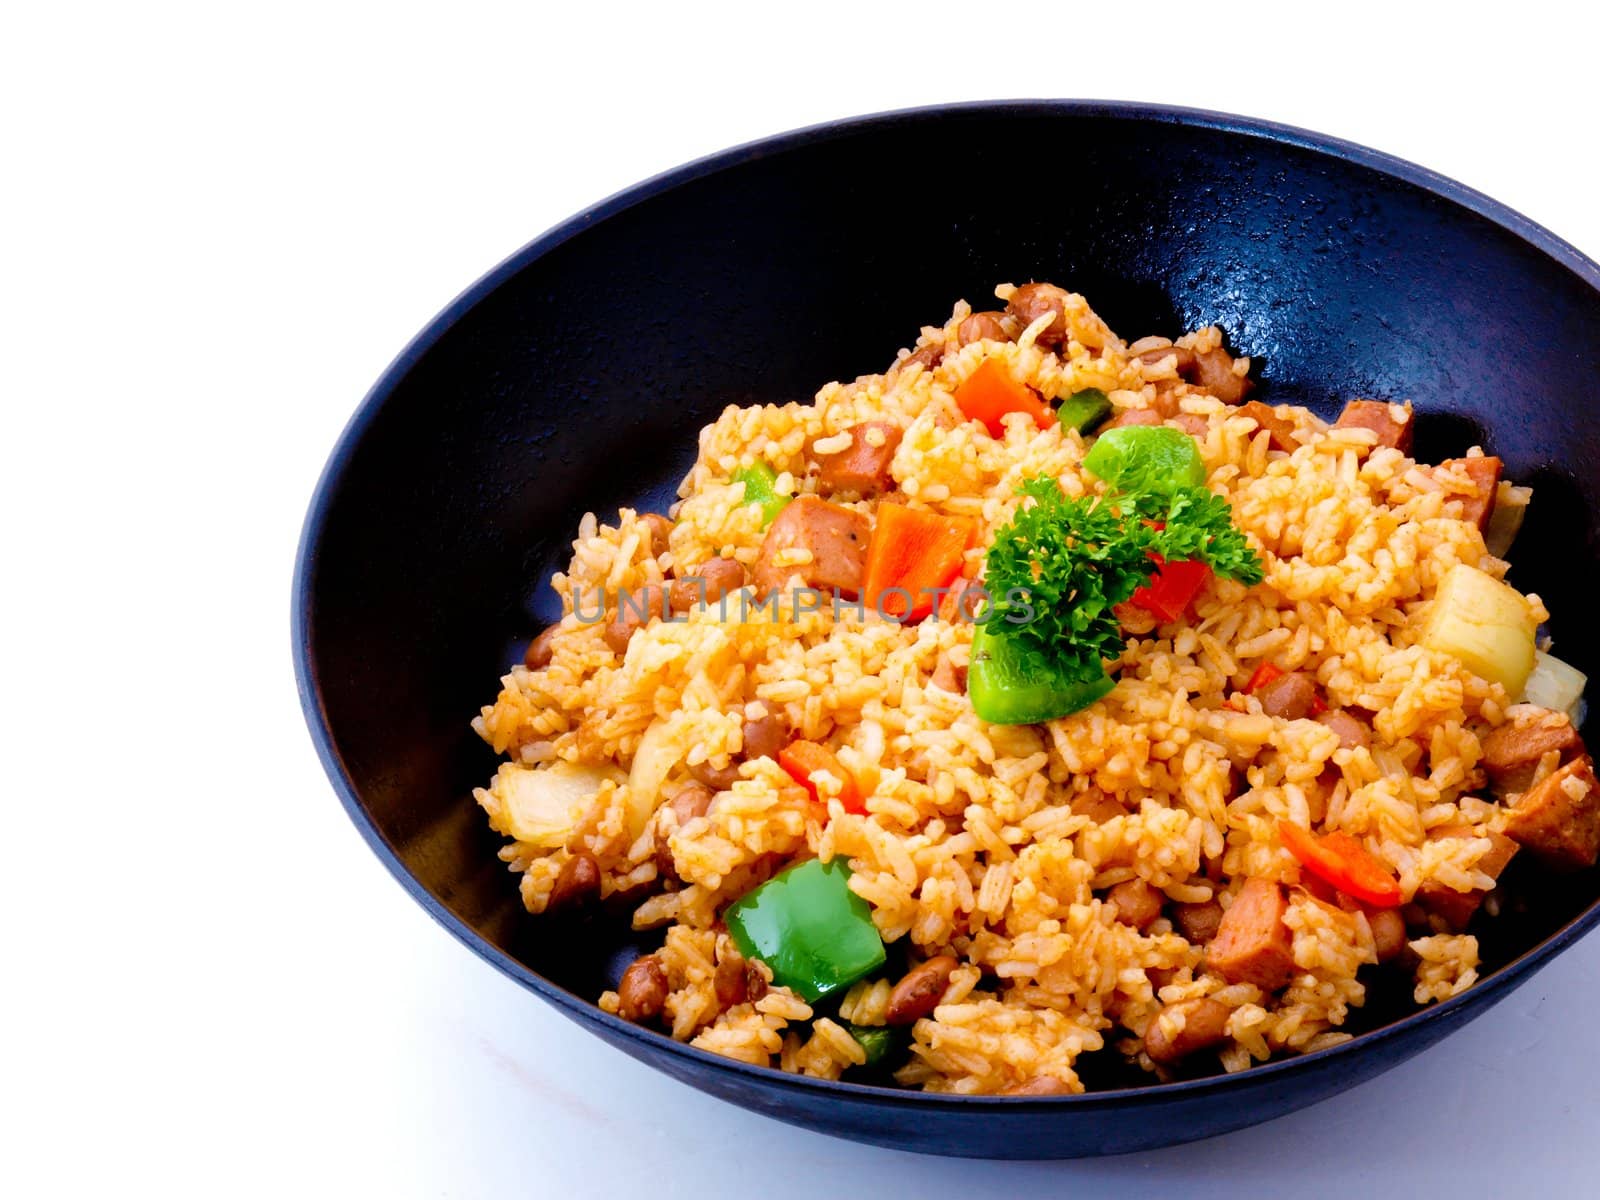  Asian Fried rice in pan by cocoyjurado9000